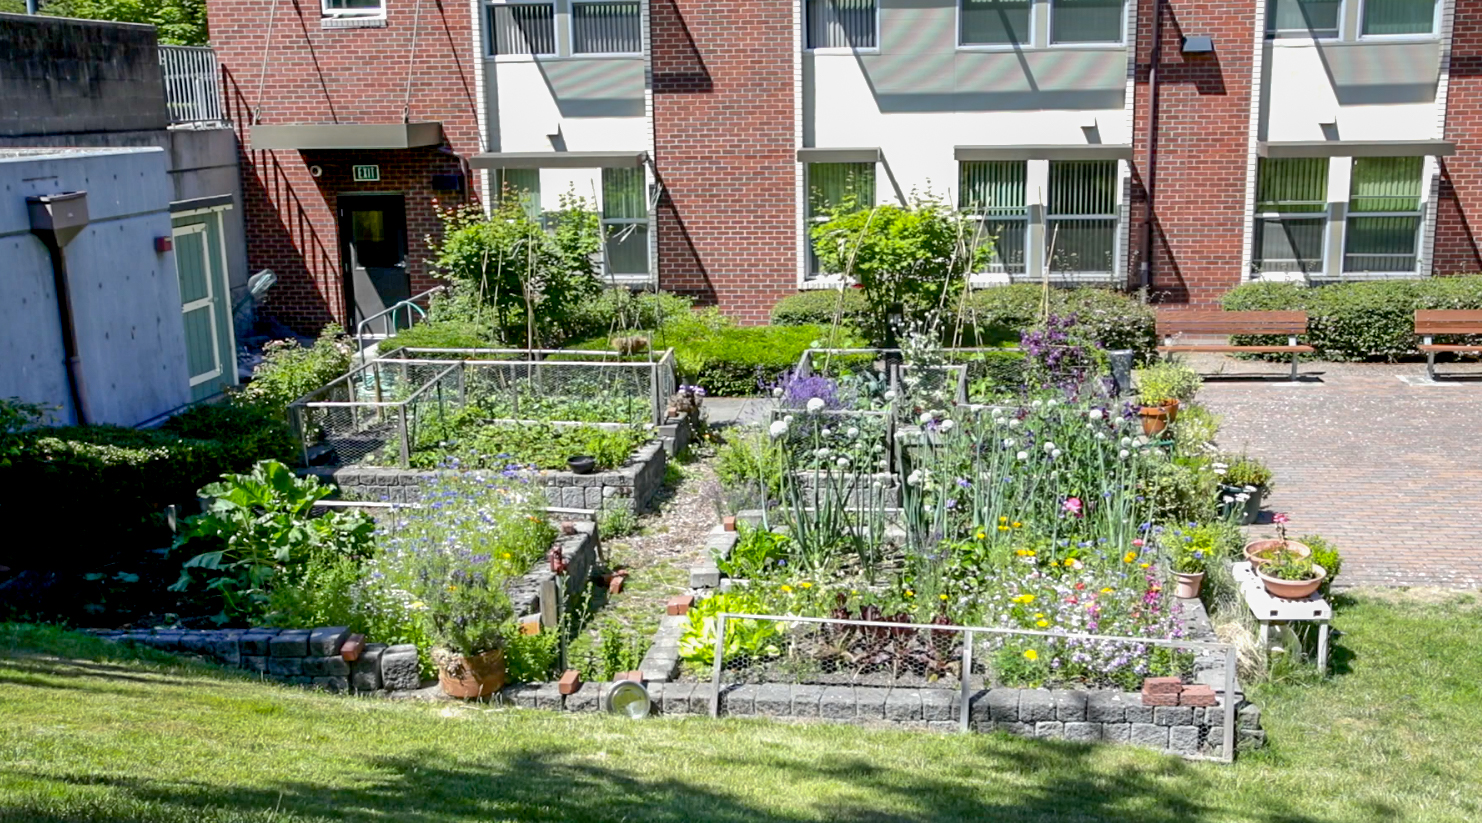 Garden plots with lush vegetation arranged in the courtyard of a brick building